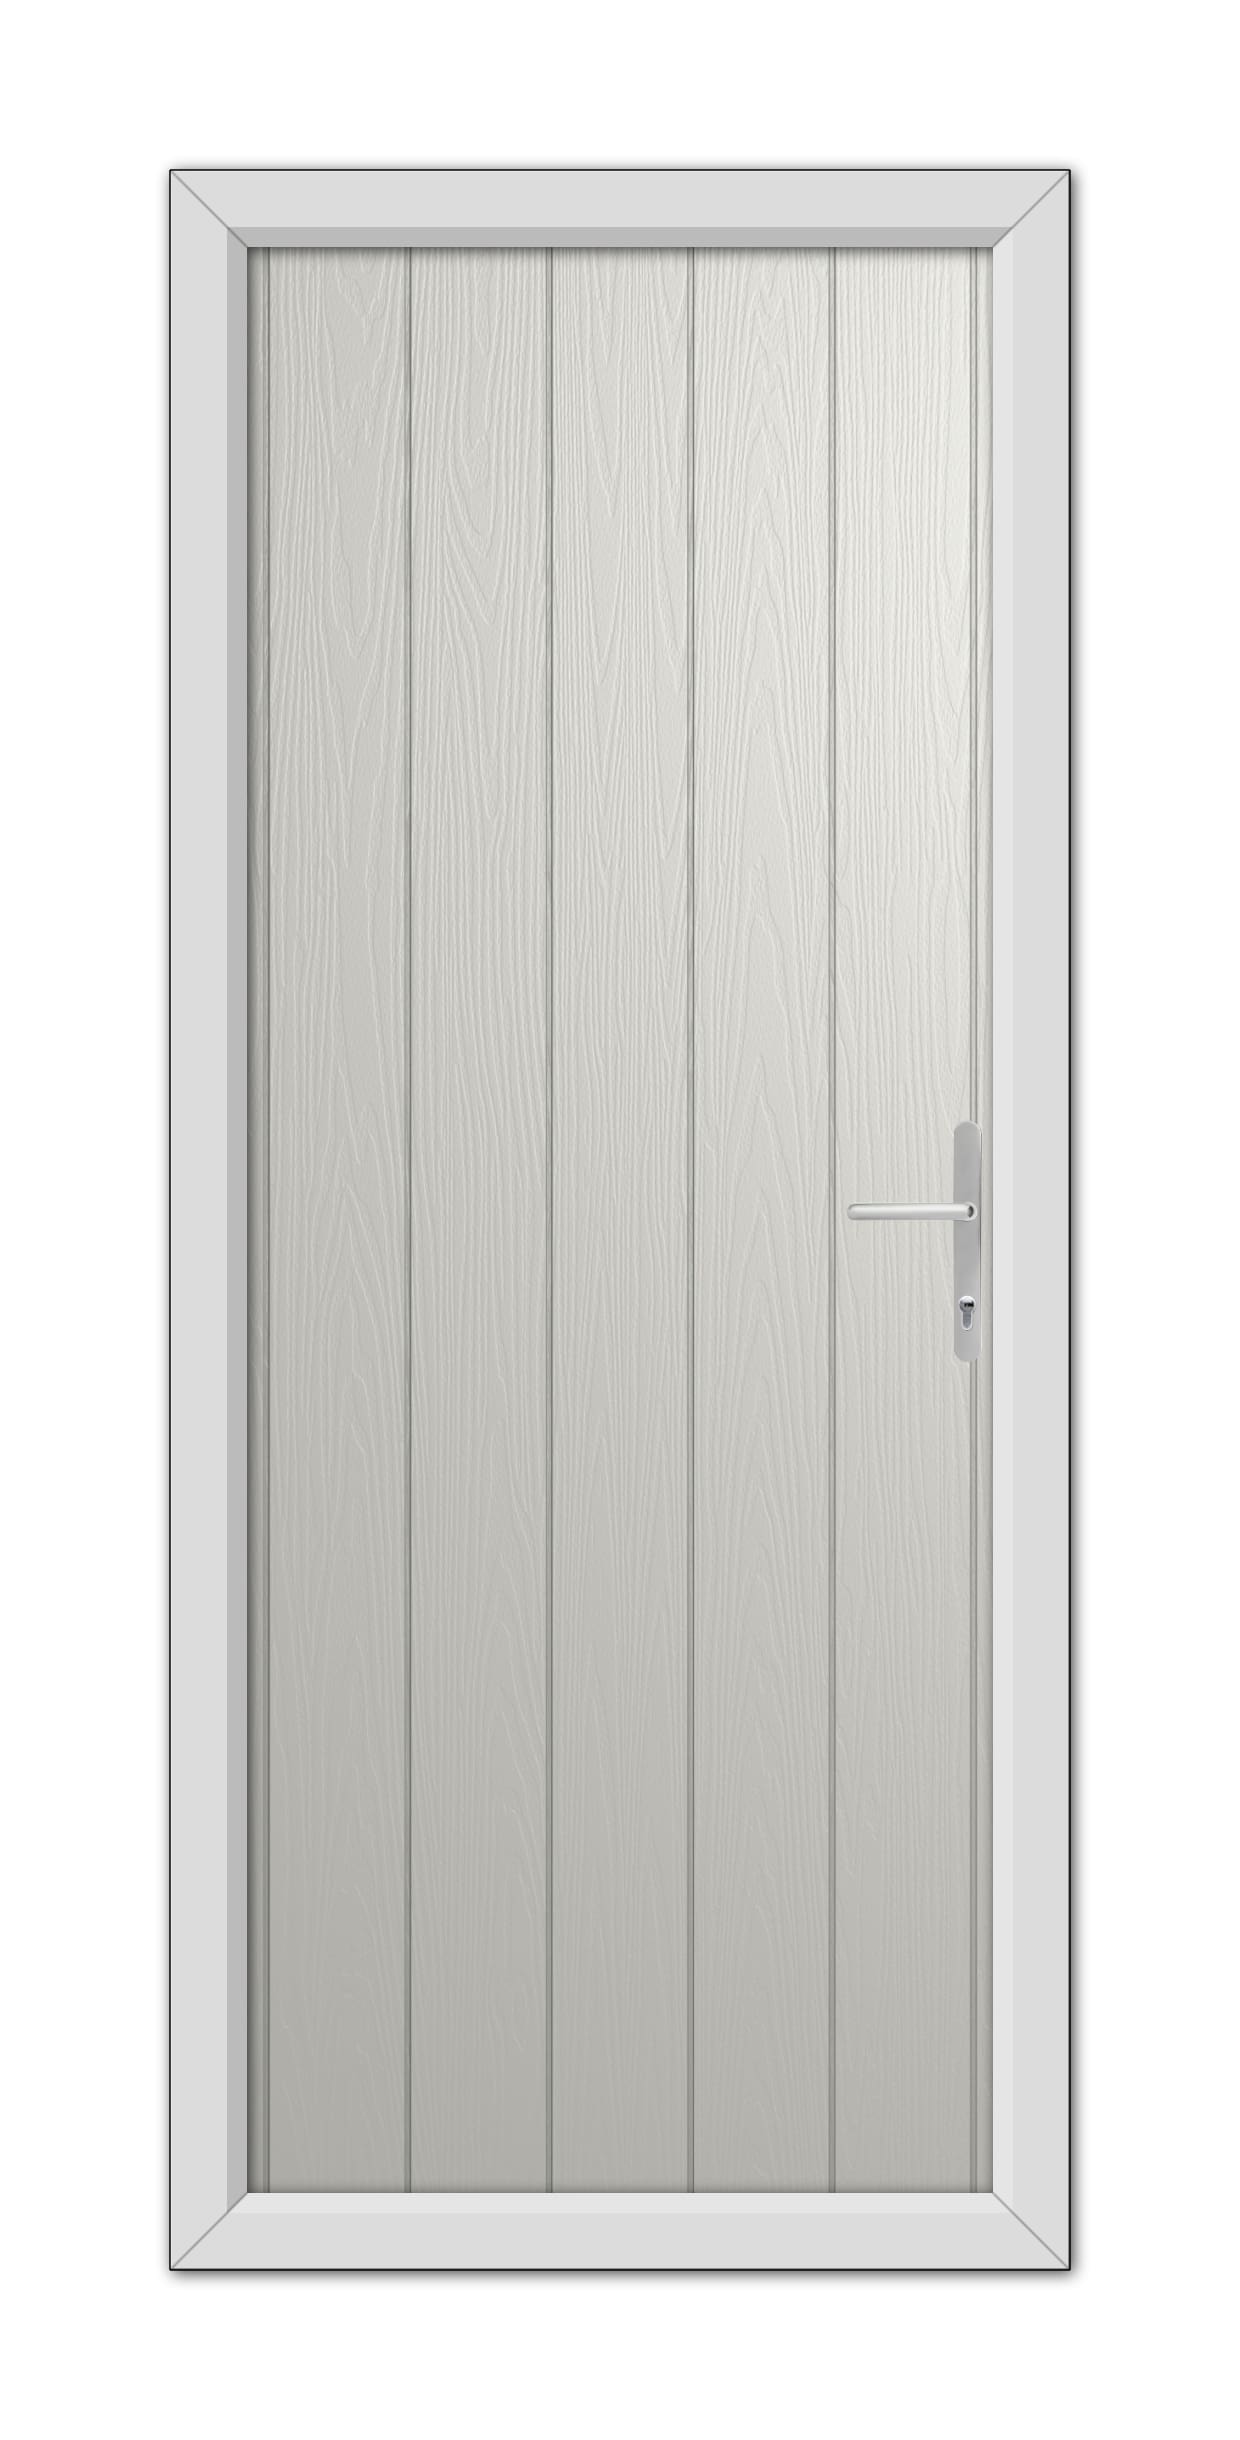 A modern Agate Grey Norfolk Solid Composite Door 48mm Timber Core with a simple silver handle, set within a frame, viewed head-on.